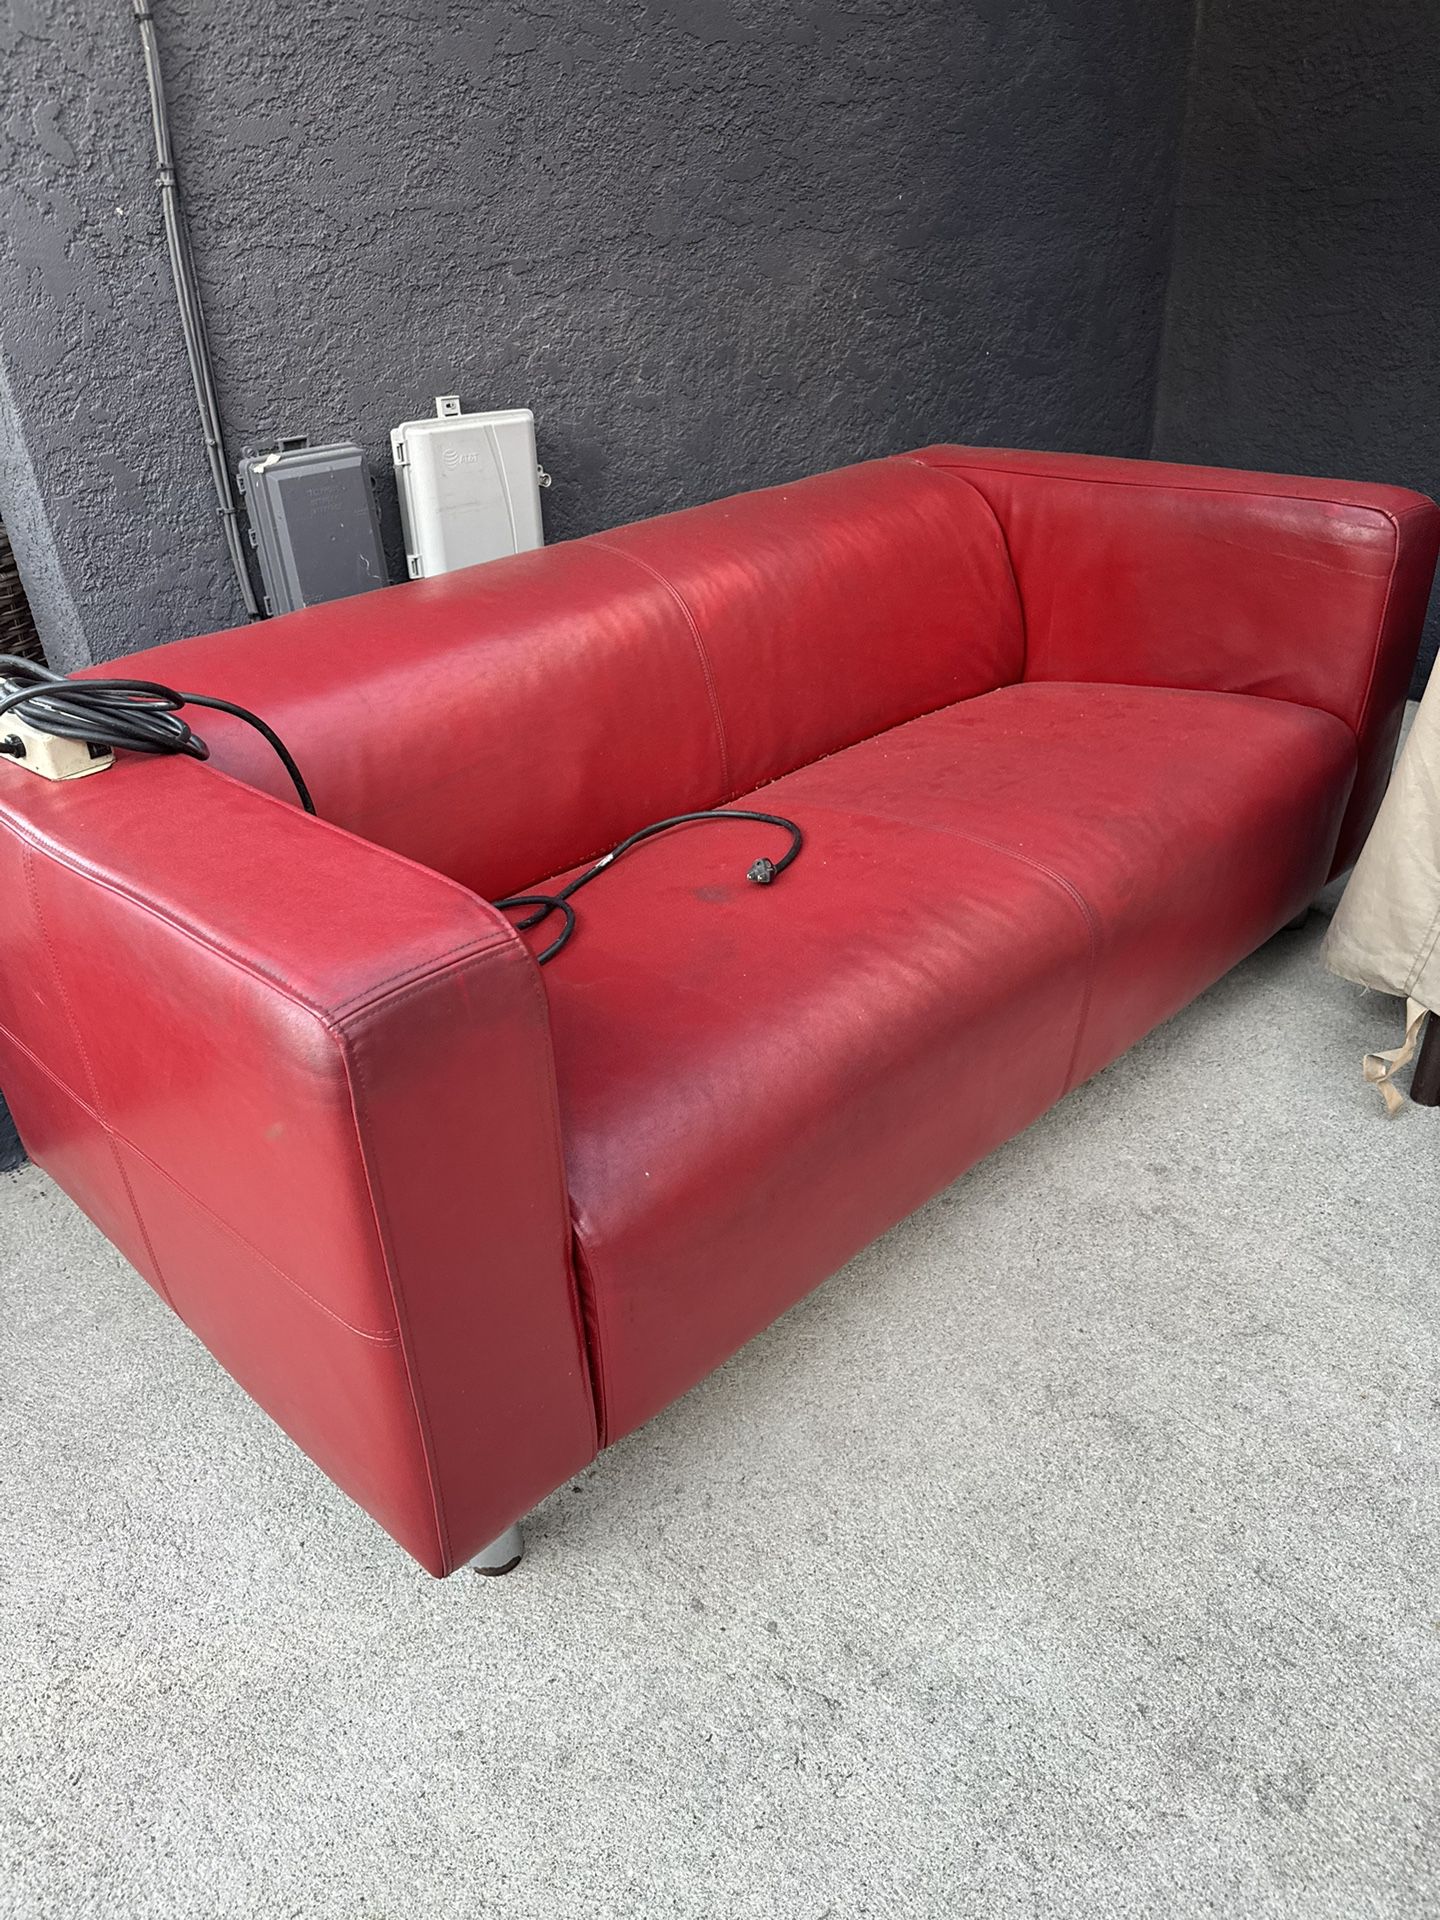 RED LEATHER COUCH